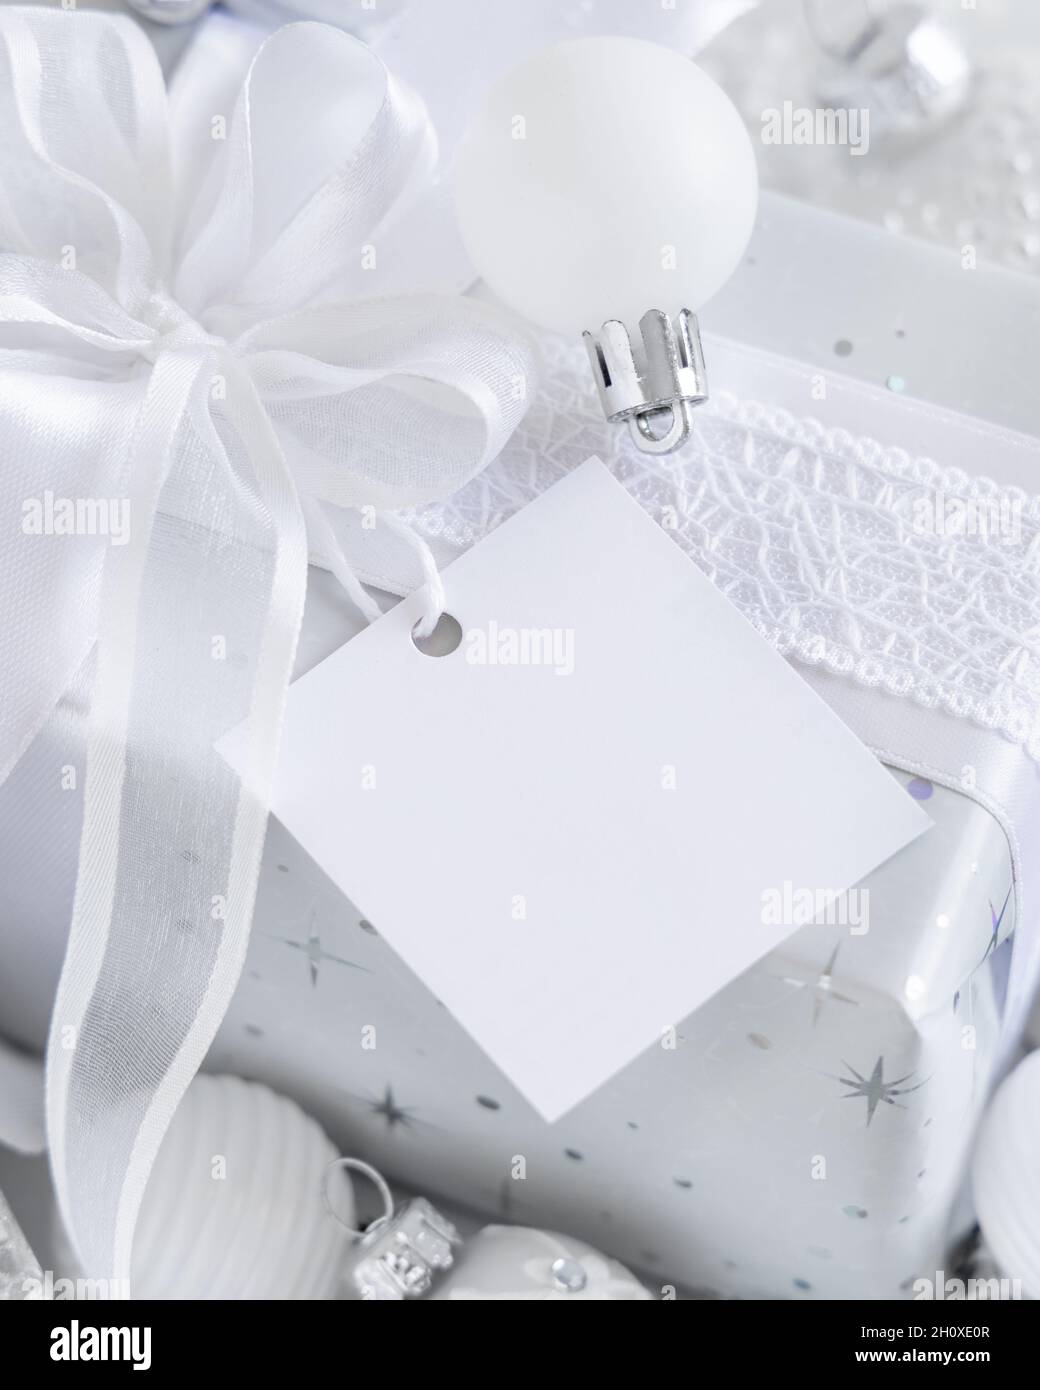 Christmas present with blue bow and silver decorations closeup Stock Photo  by katrinshine